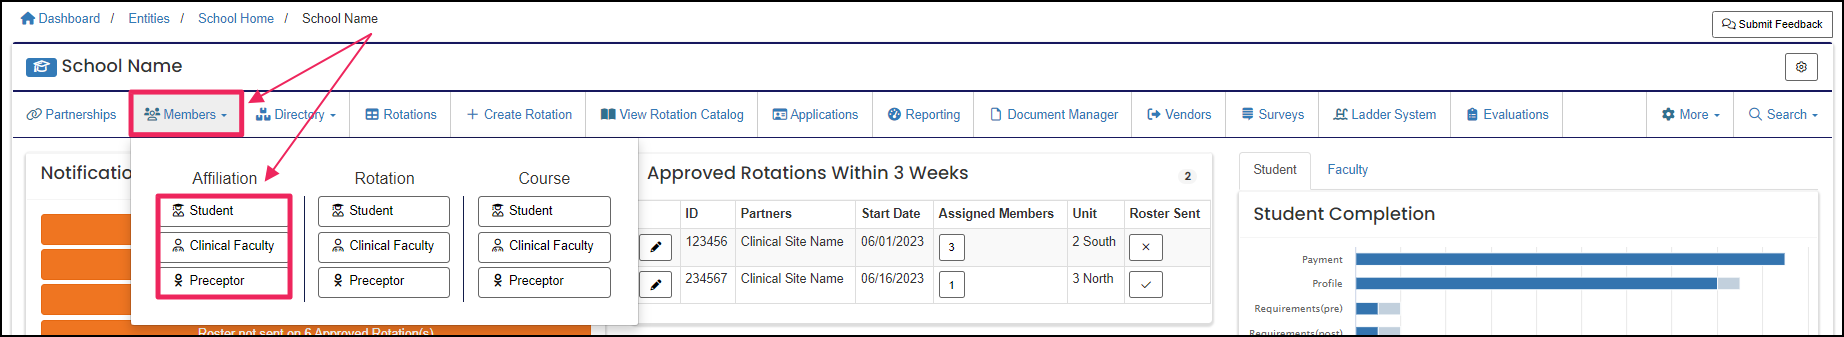 Image shows member tab and affiliation column